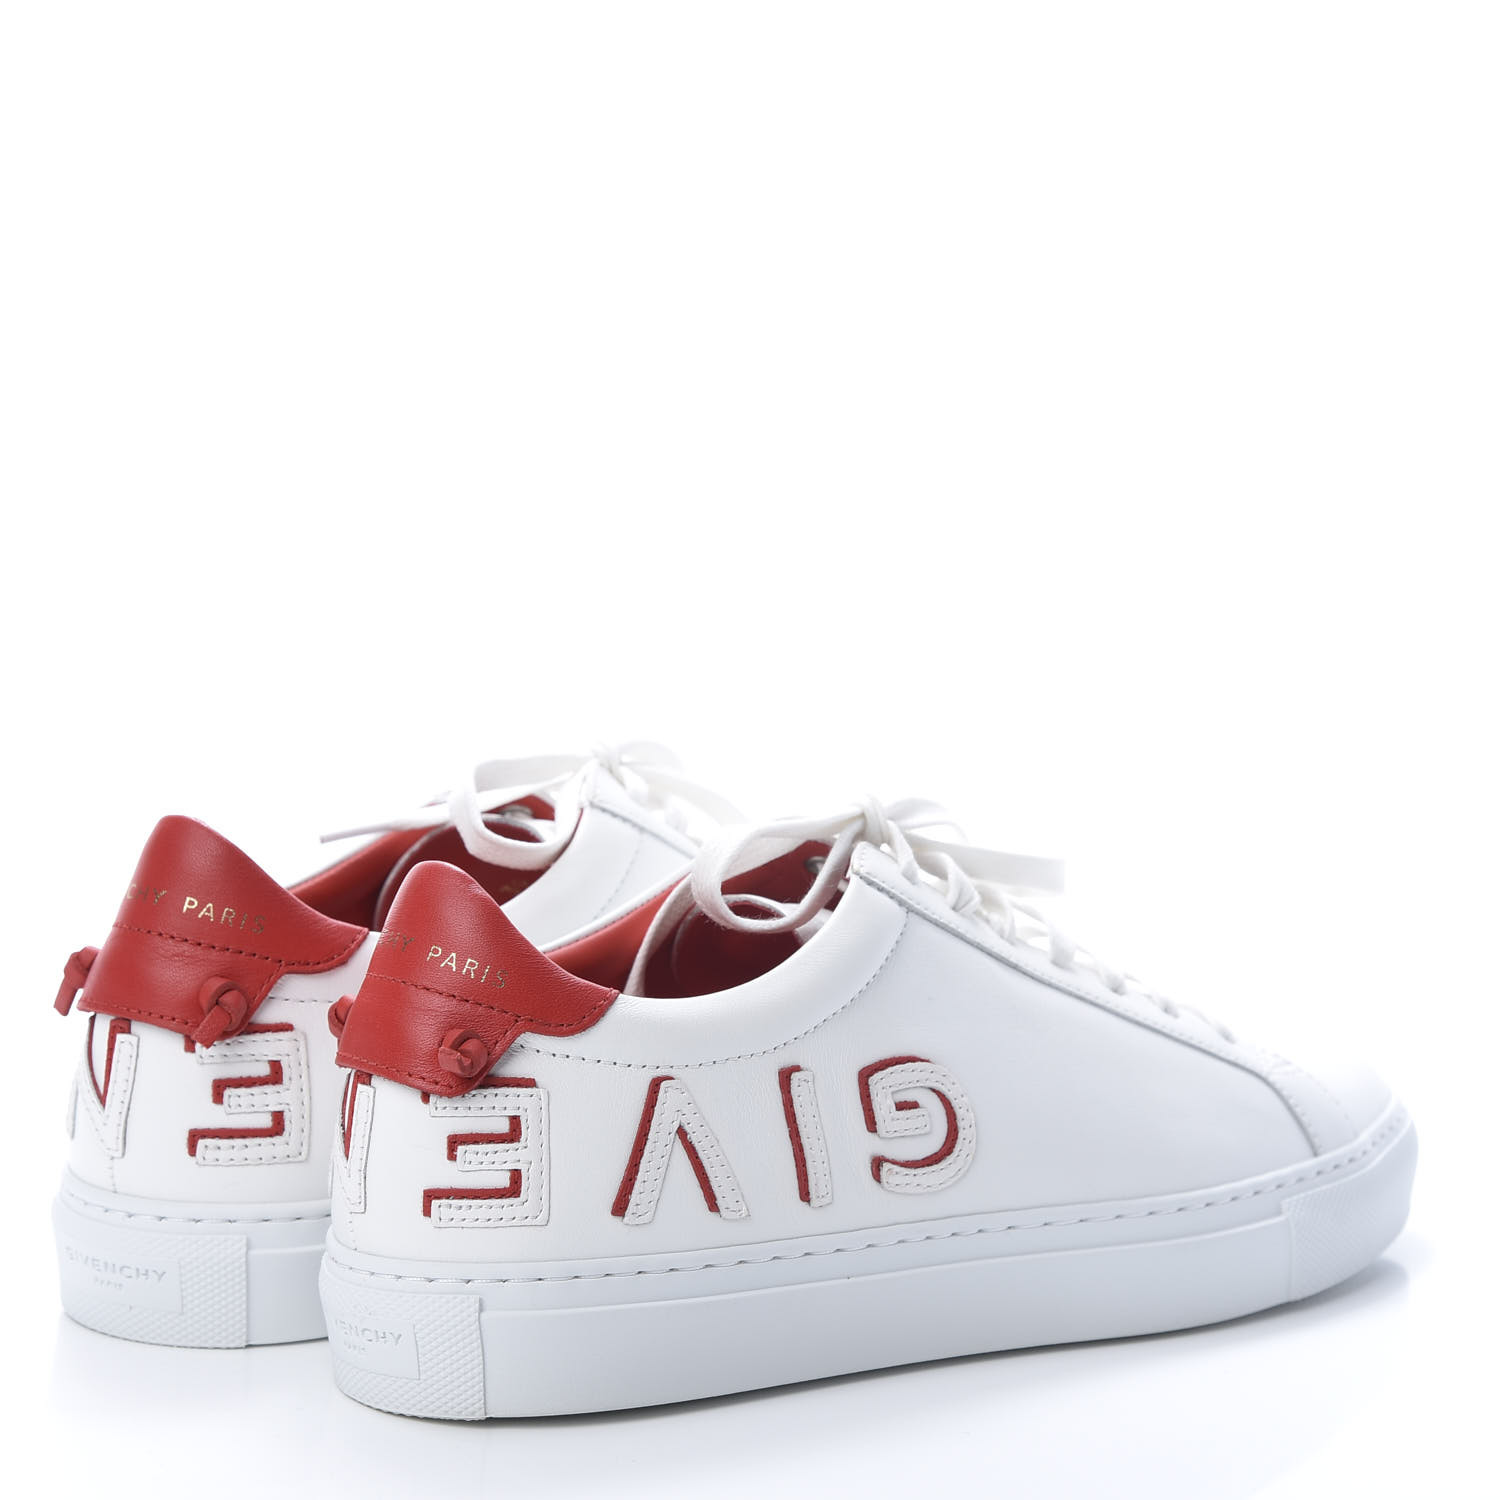 GIVENCHY Calfskin Reverse Logo Urban Street Sneakers 39 White Red 667571 | FASHIONPHILE